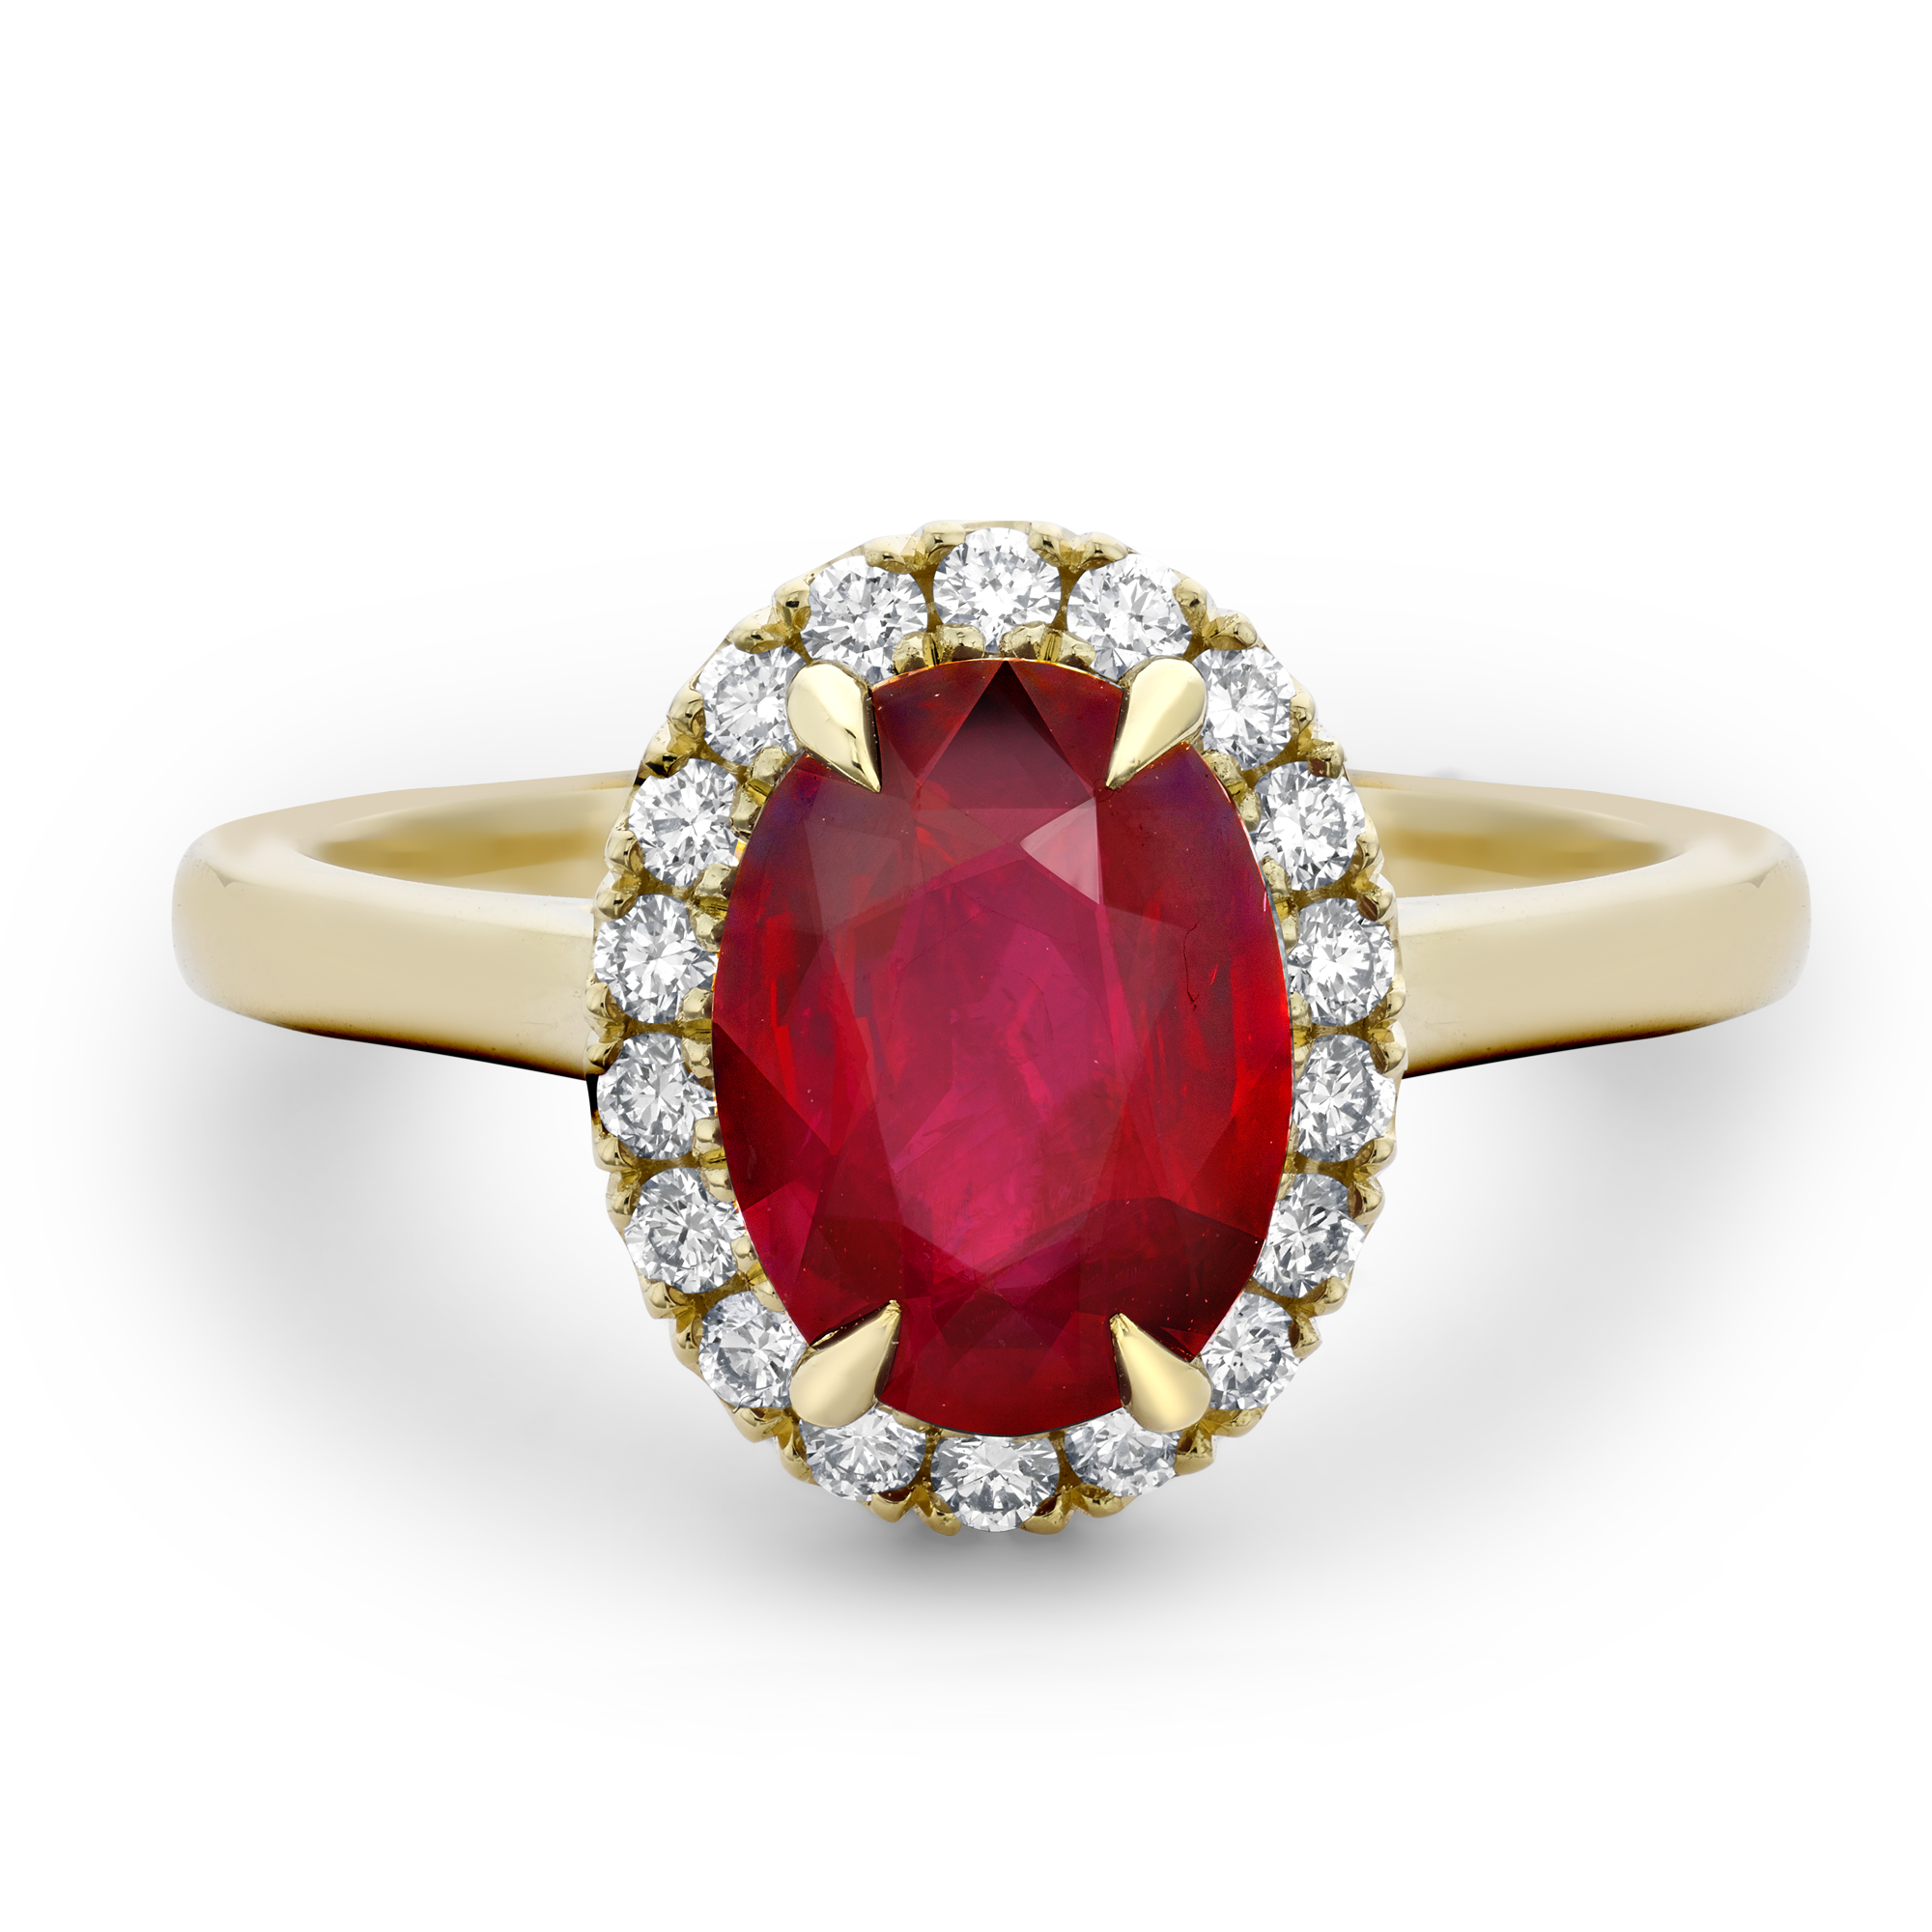 Celestial Mozambique 2.64ct Ruby and Diamond Cluster Ring Oval Cut, Claw Set_2